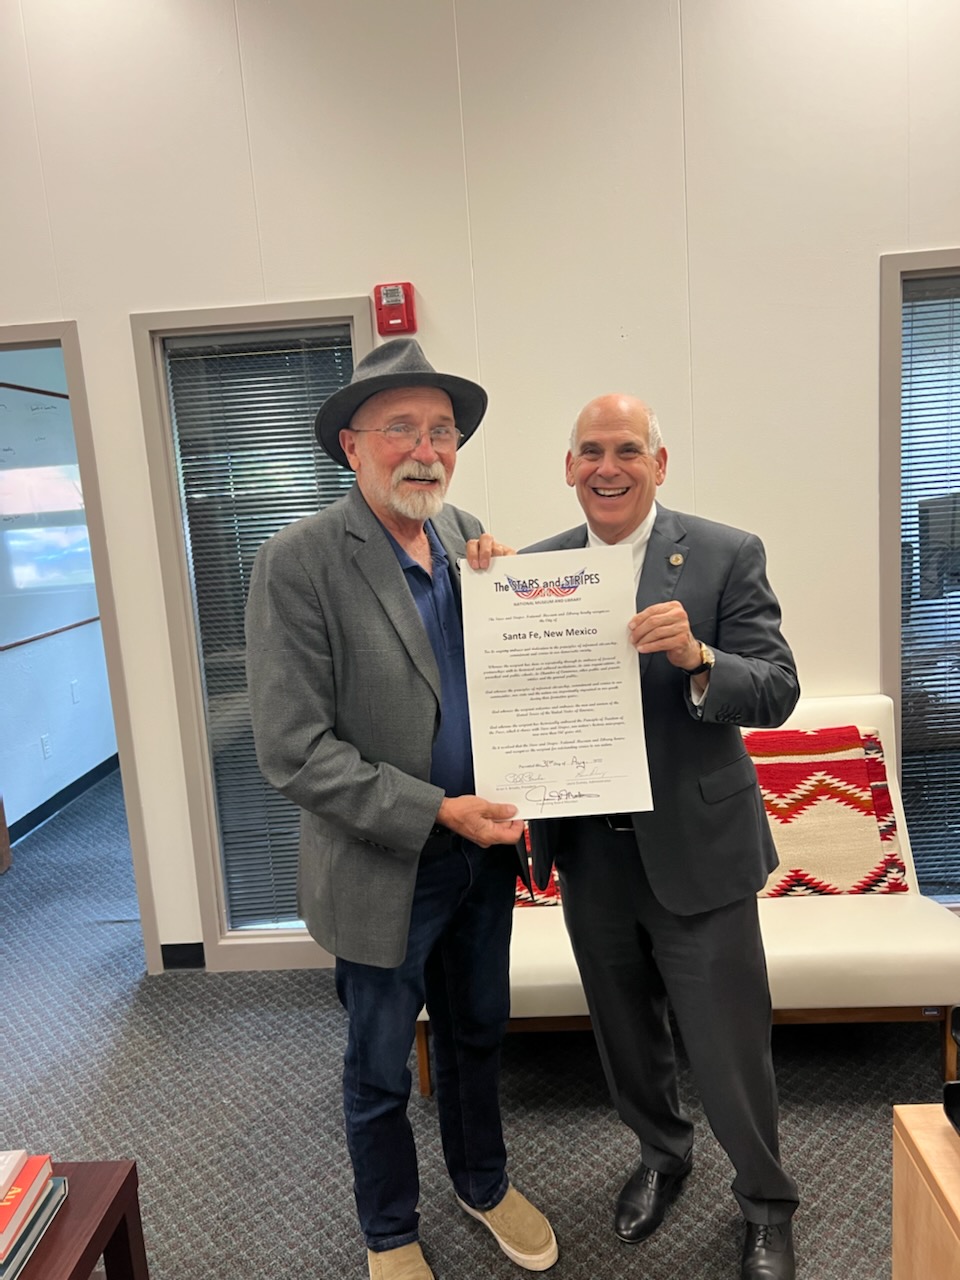 On Wednesday, August 31, 2022, Jim Martin presented the Stars and Stripes City Proclamation to Santa Fe, New Mexico which was accepted by Mayor Alan Webber.